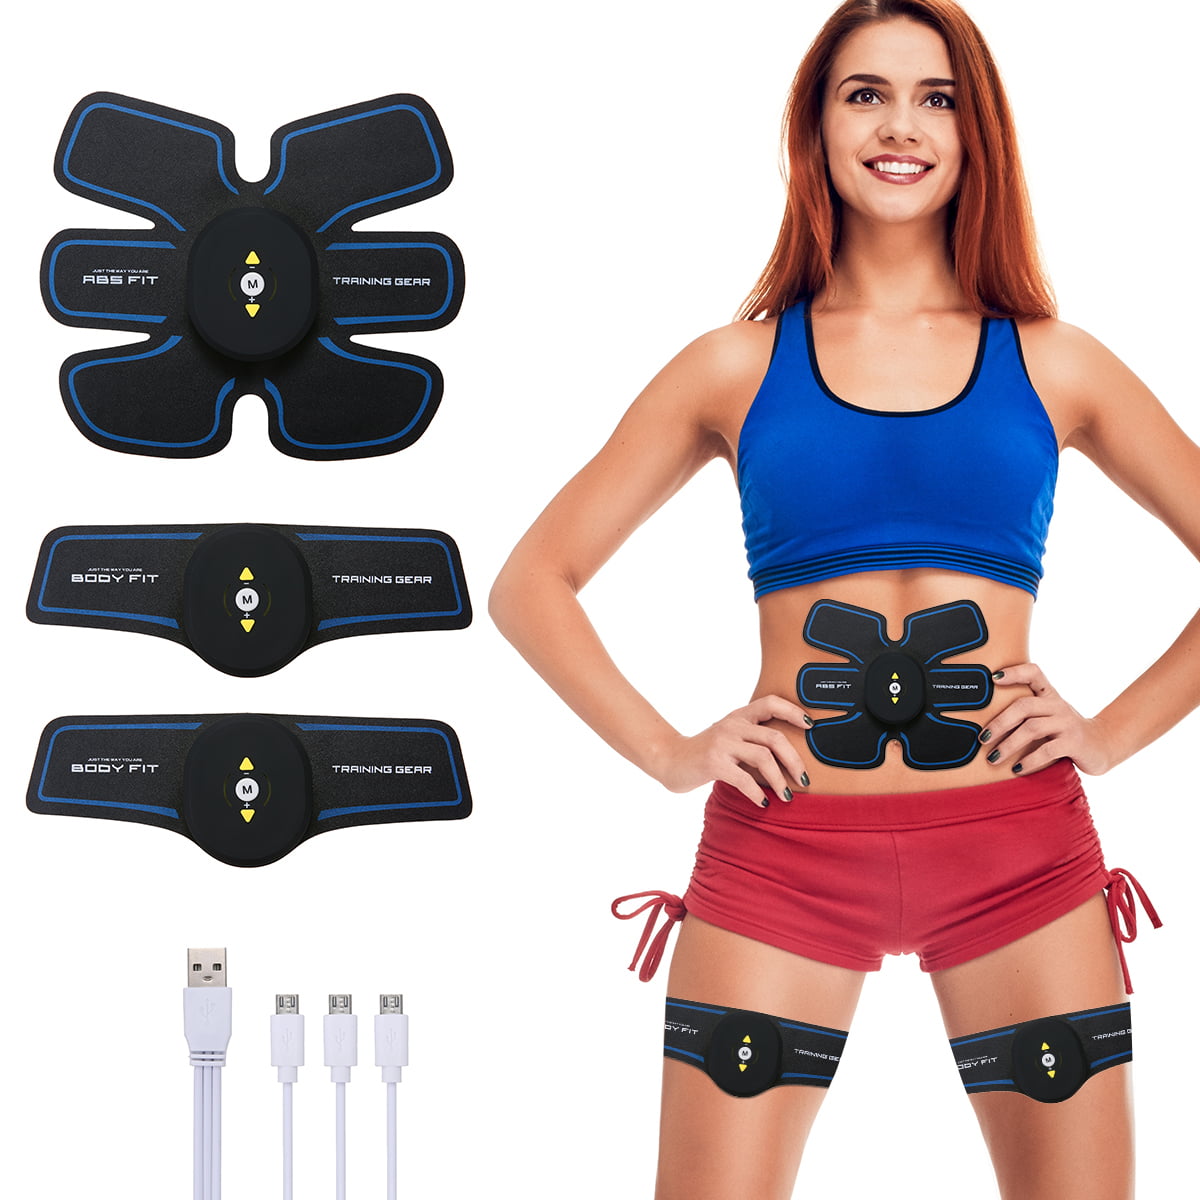 Abdomen Unisex Wireless Muscle Stimulation Body Toning System ABS FIT Gear Training Fitness Body Fit For Arm IMATE Wireless Electronic Muscle Toner Fitness System Body Massager Thight 